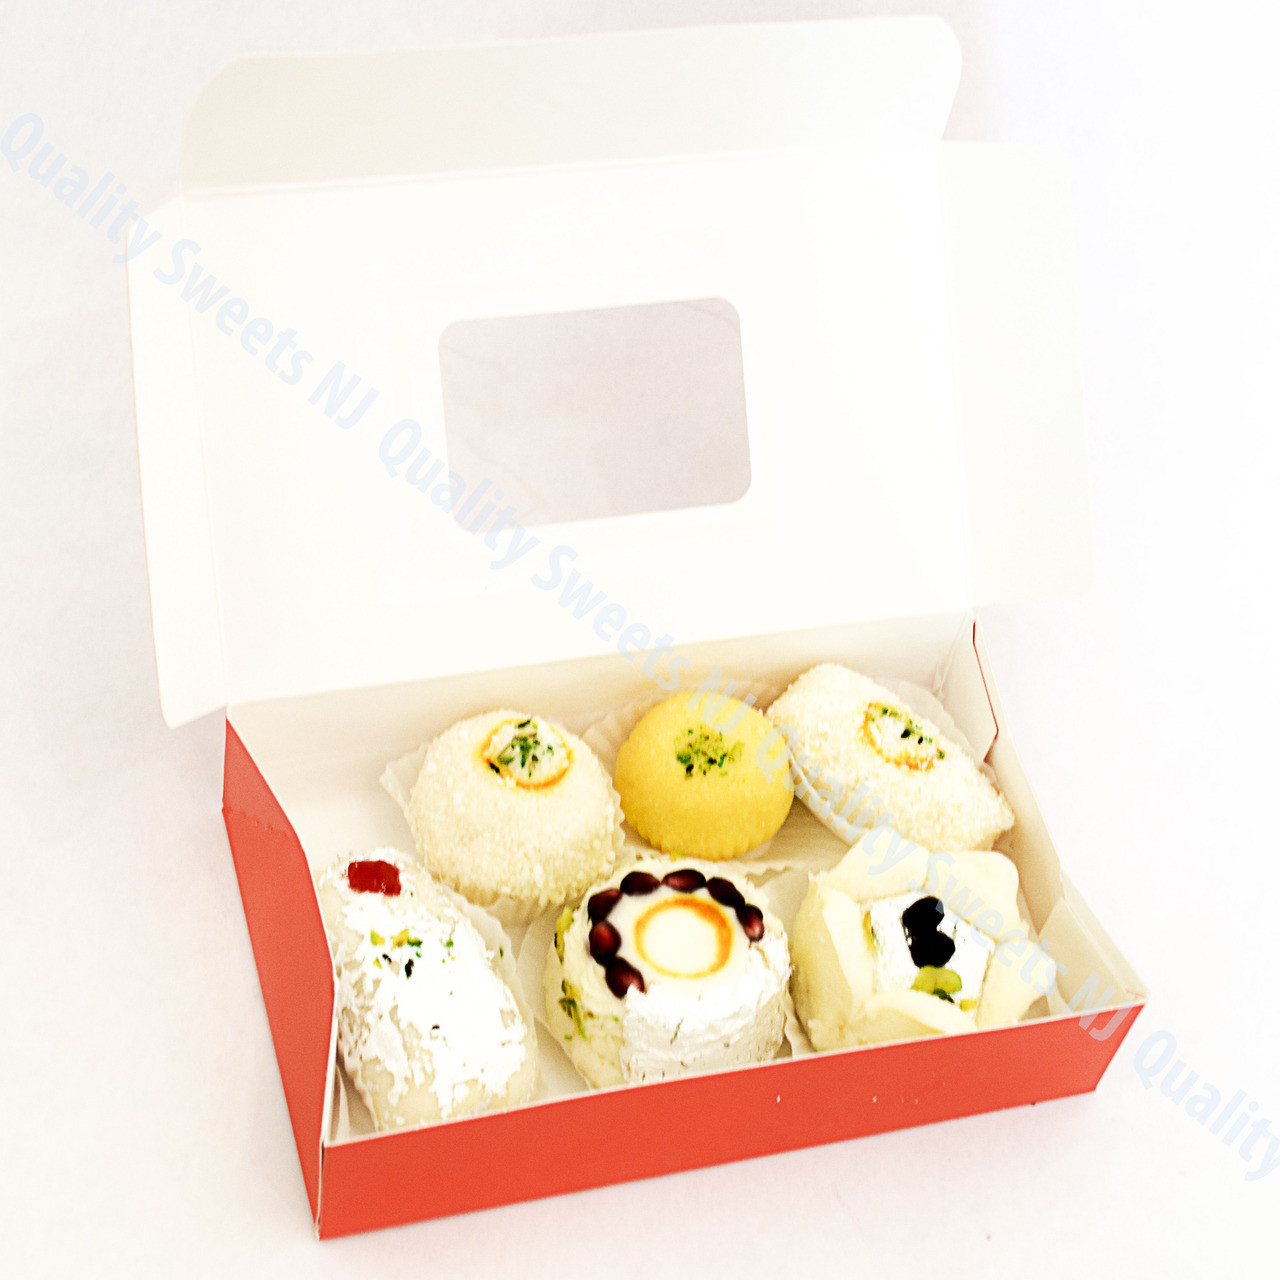 Bengali Sweet Box - Quality Indian Sweets - Taste The Tradition